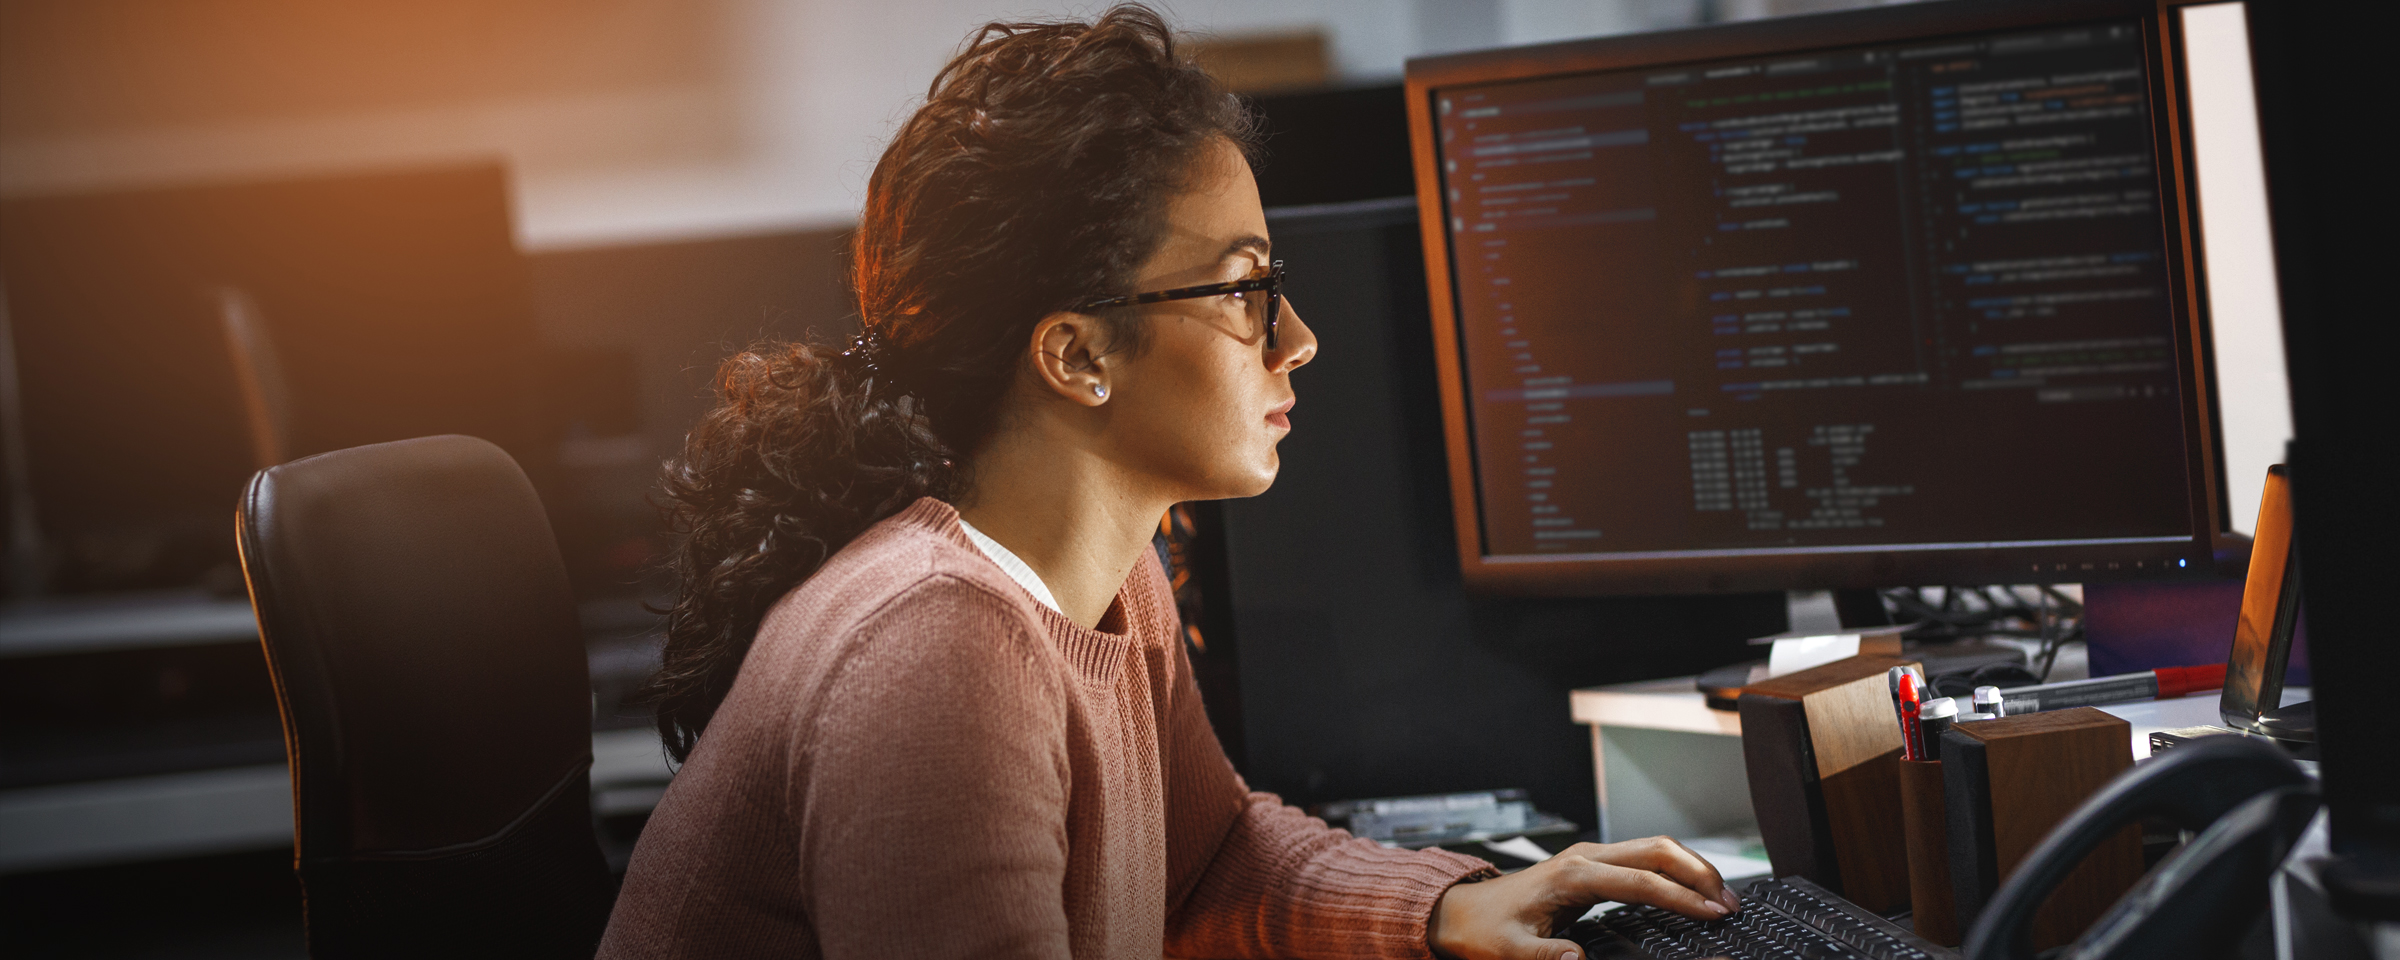 Woman coding on a computer